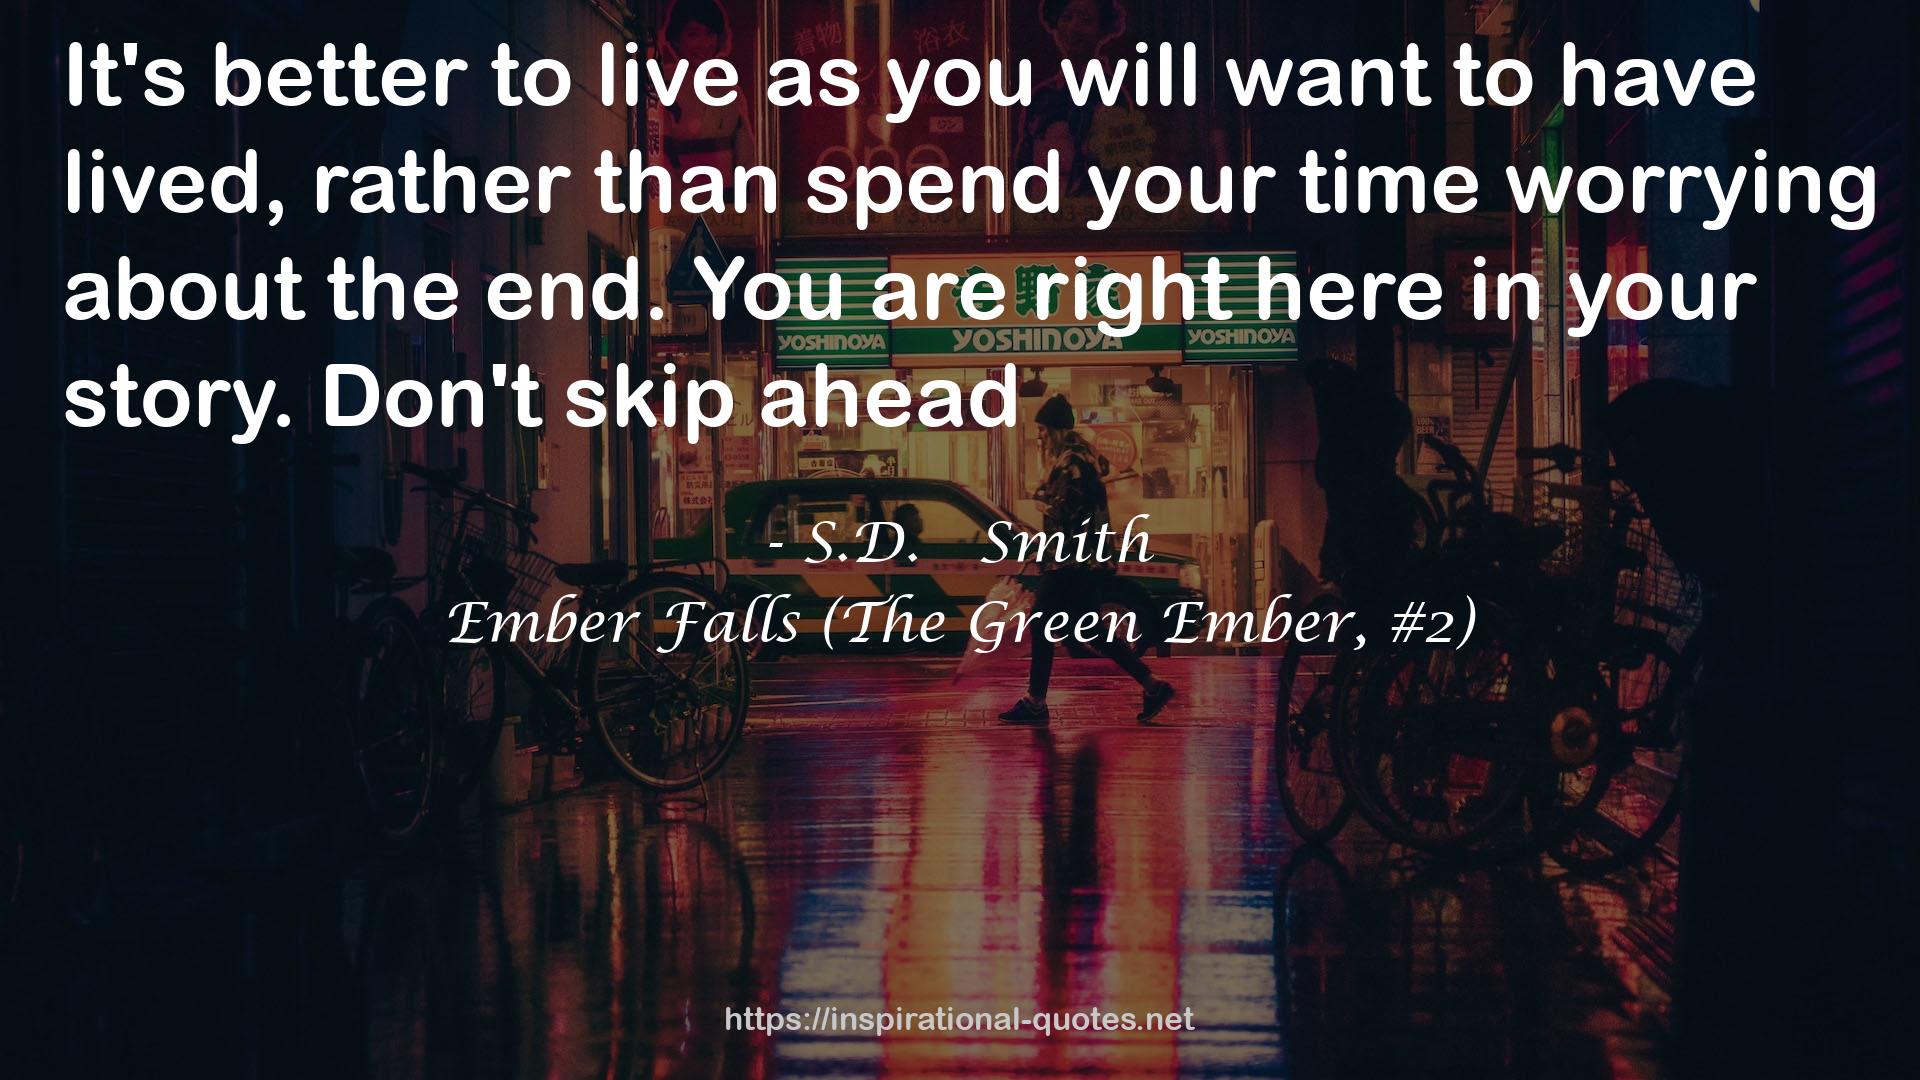 Ember Falls (The Green Ember, #2) QUOTES